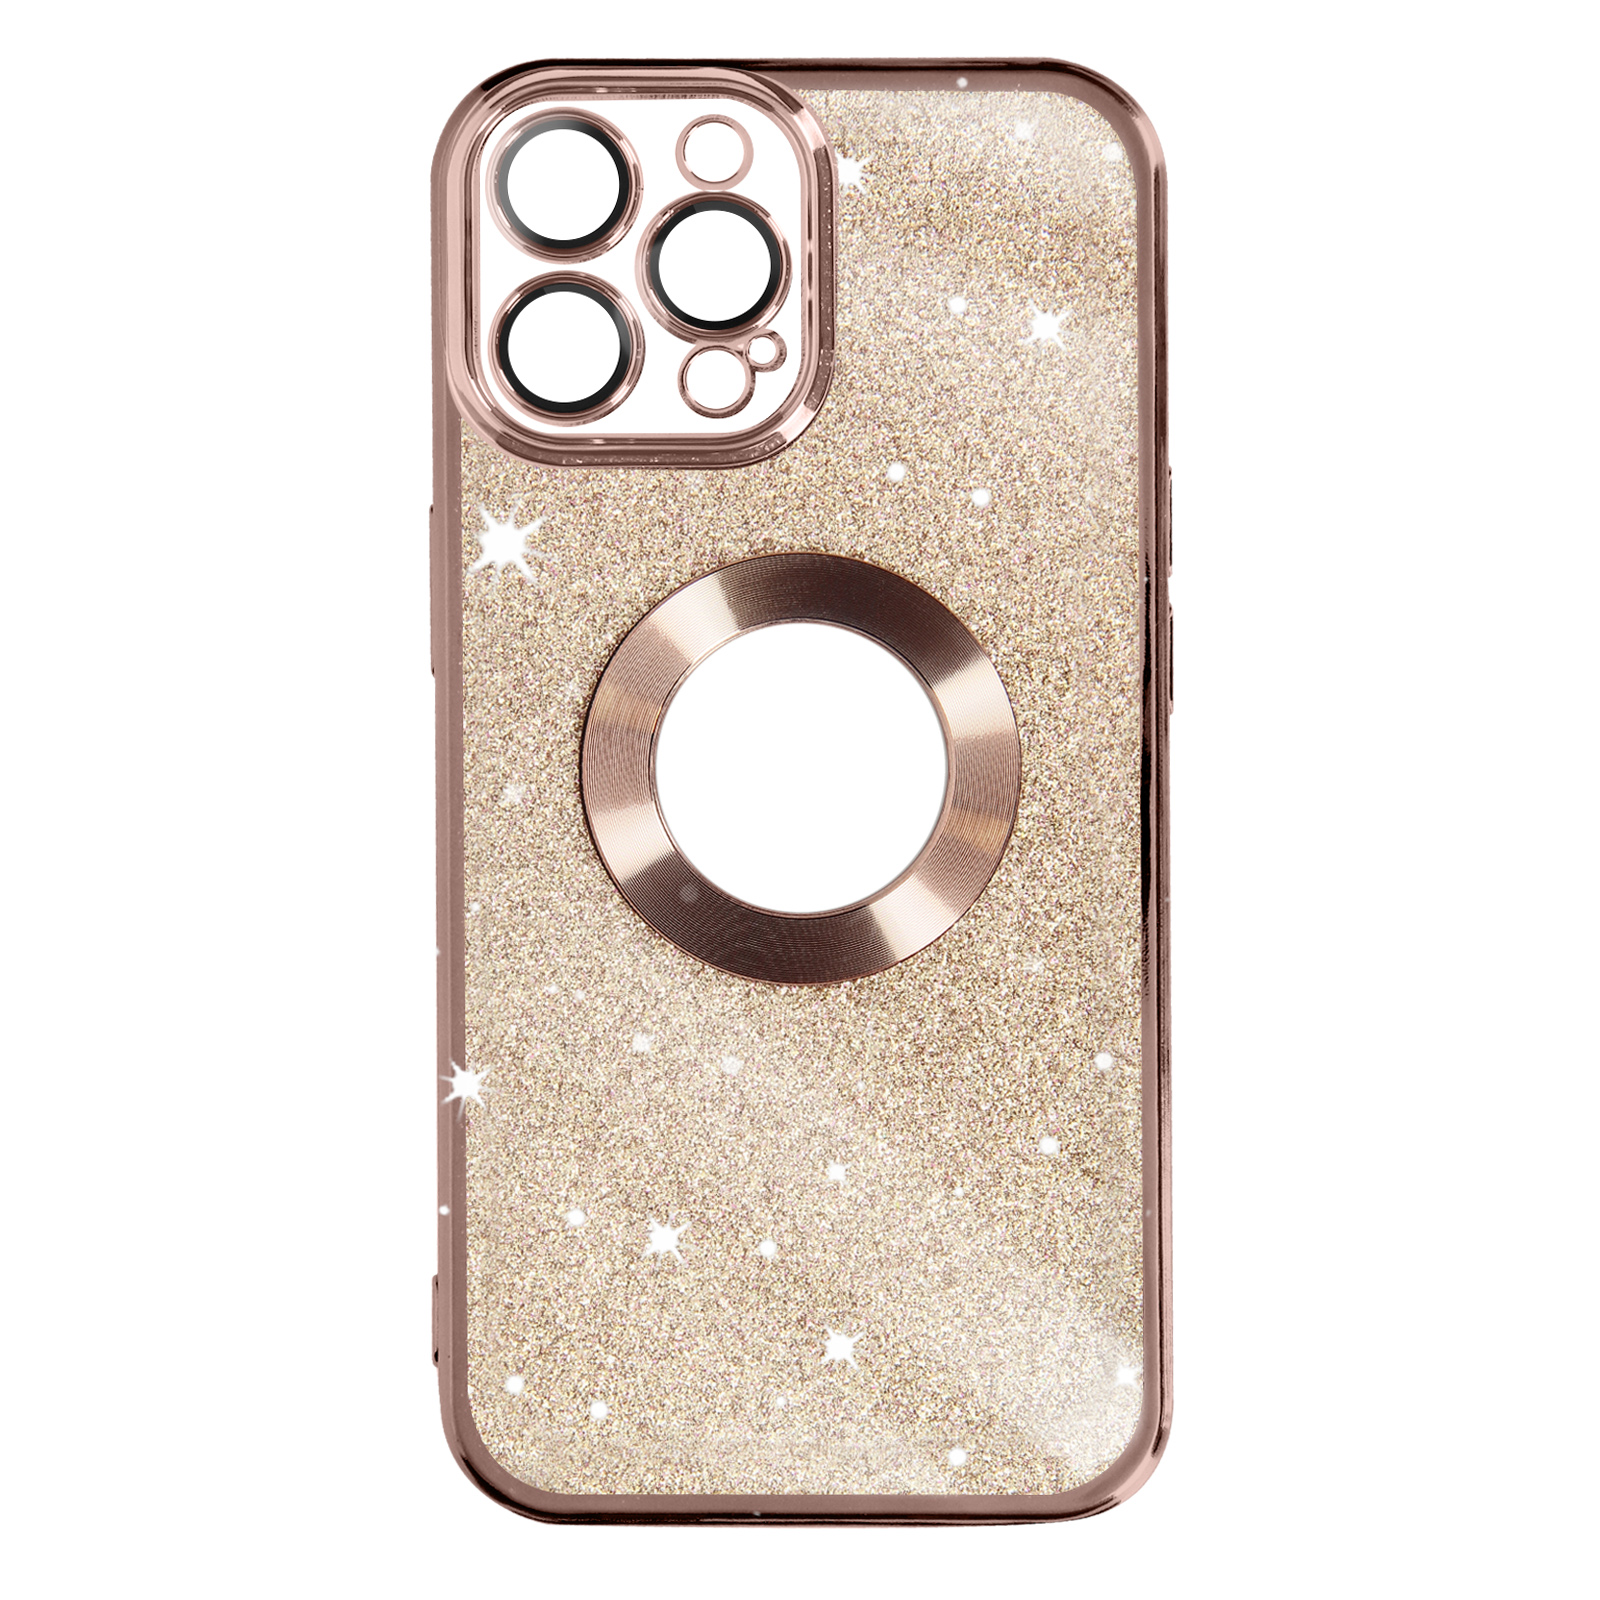 AVIZAR Protecam Spark Series, Pro Apple, 13 Max, iPhone Backcover, Rosegold